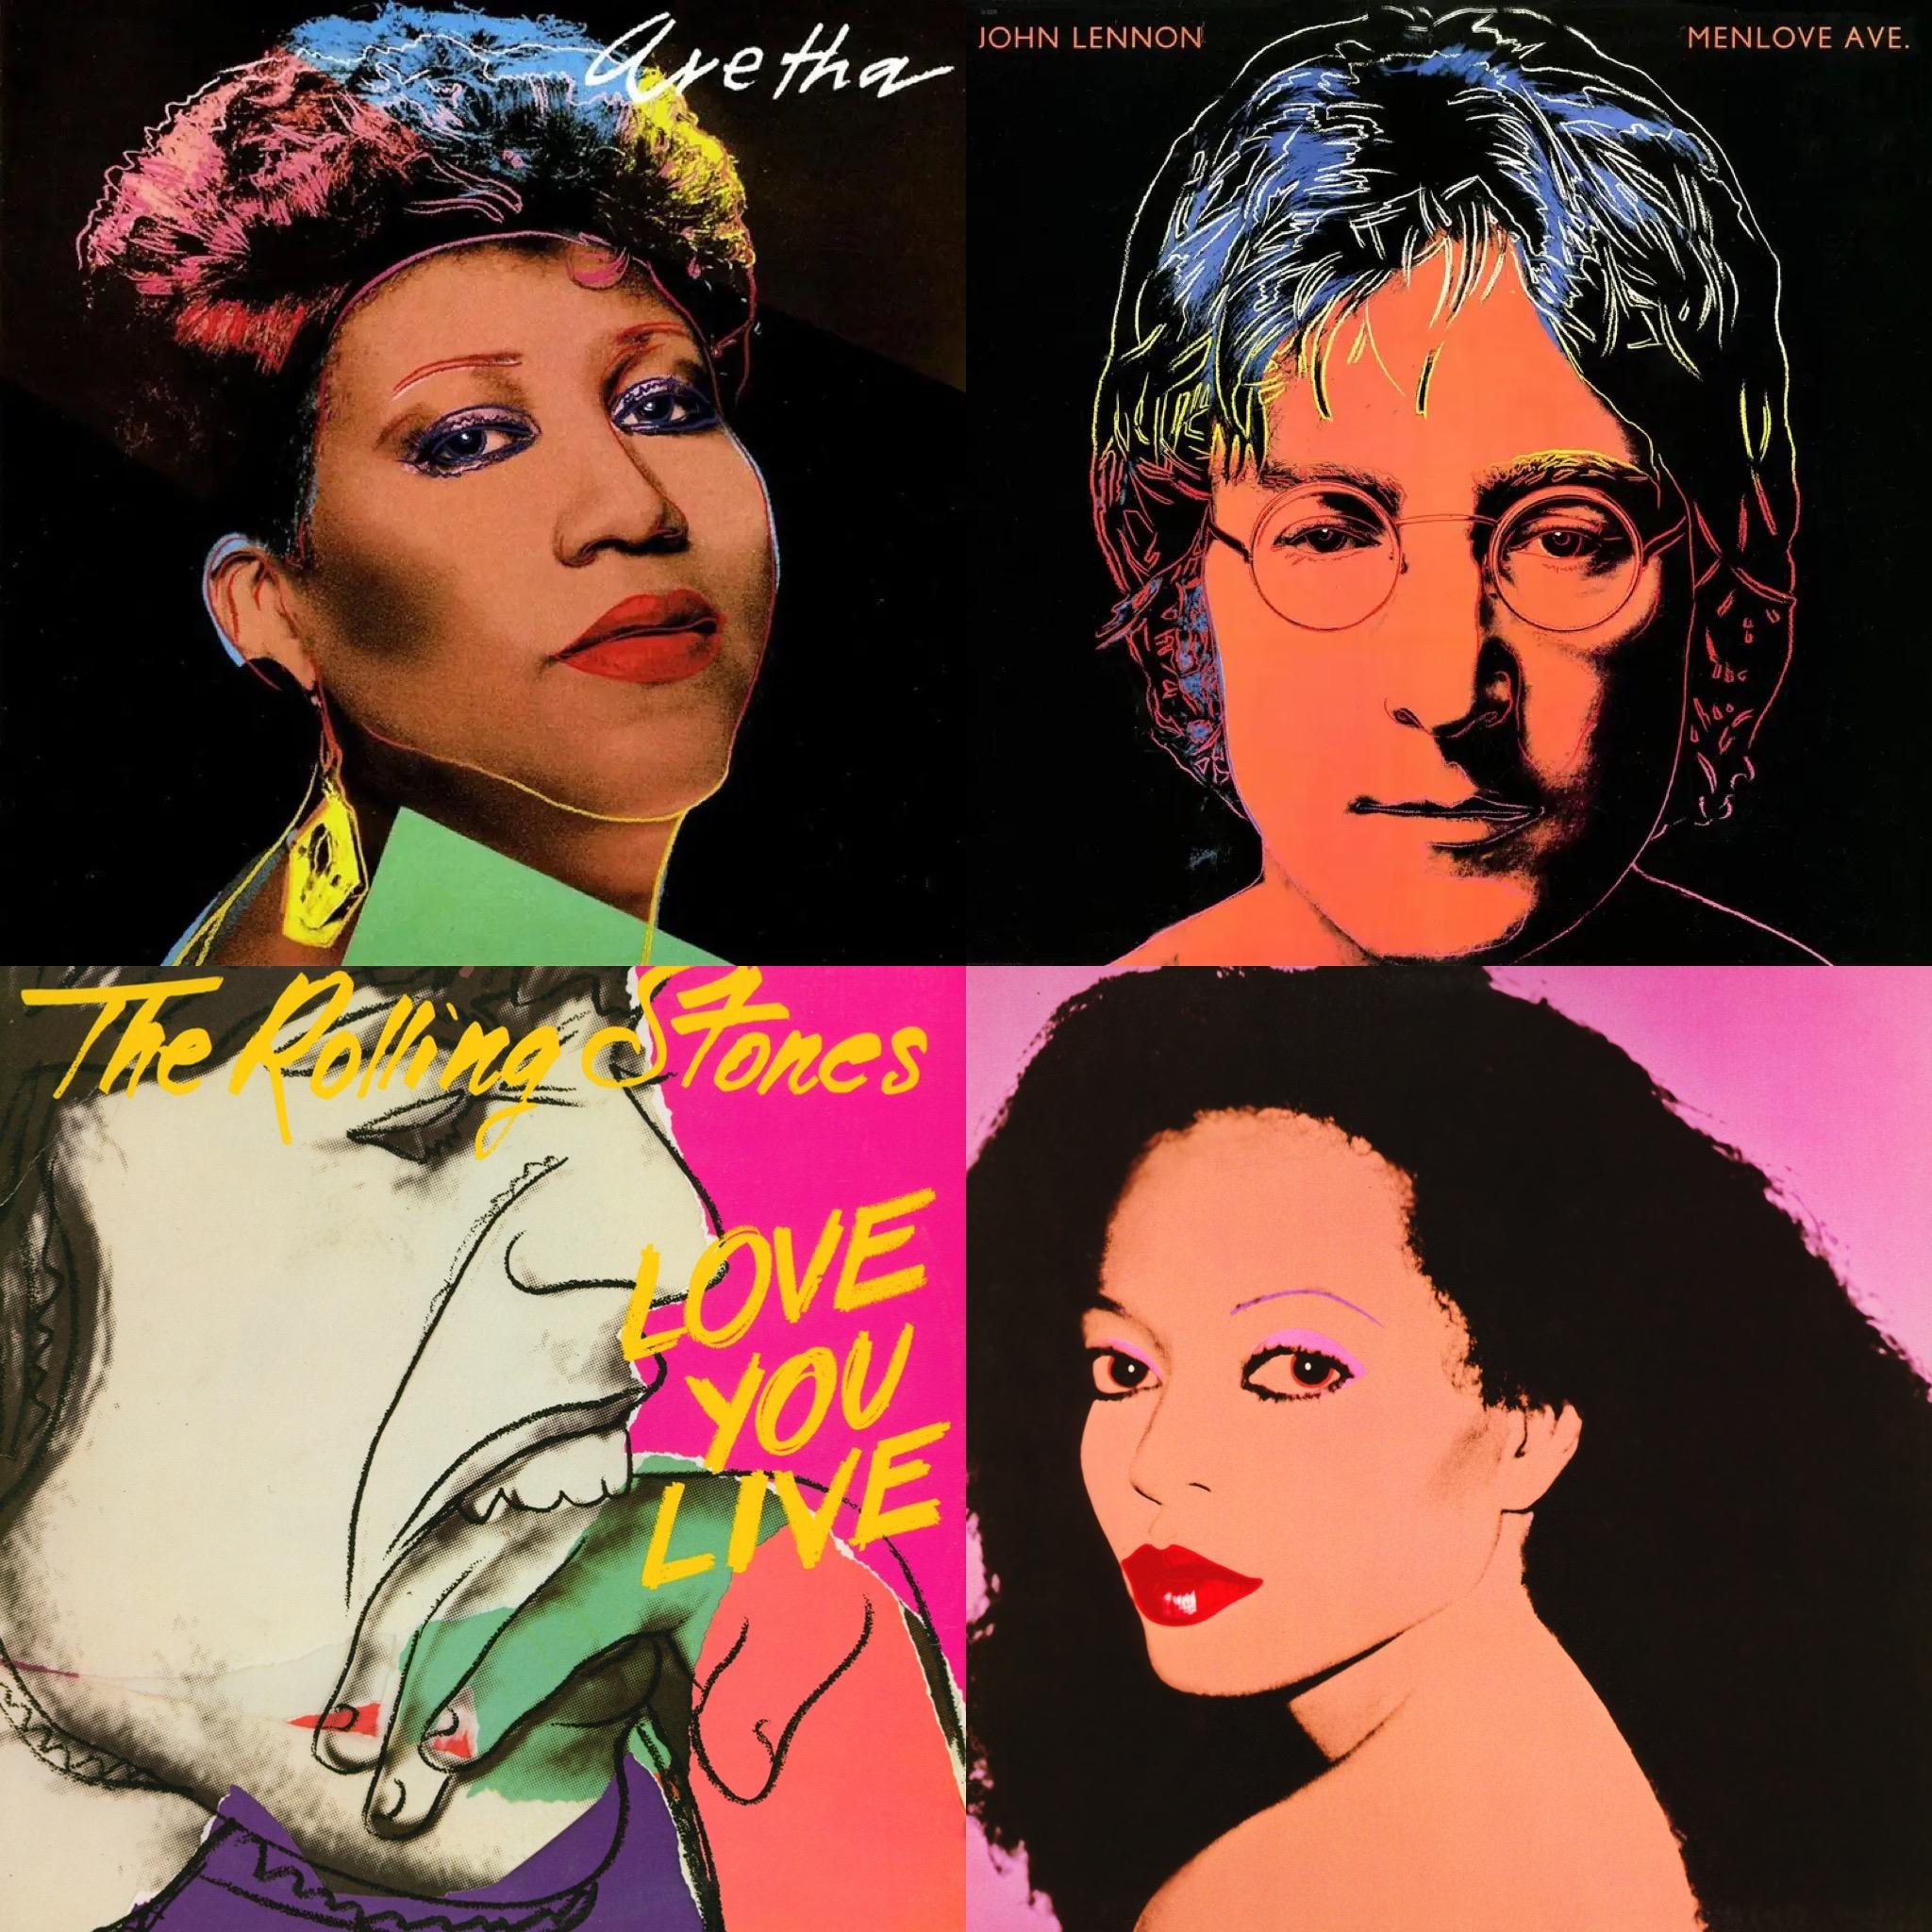 Andy Warhol Record Art 1977-1986:
Set of 4 Andy Warhol illustrated record albums accompanied by their original vinyl records:

Warhol's classic rendition of Diana Ross, Aretha Franklin, The Rolling Stones & John Lennon - when combined, make for